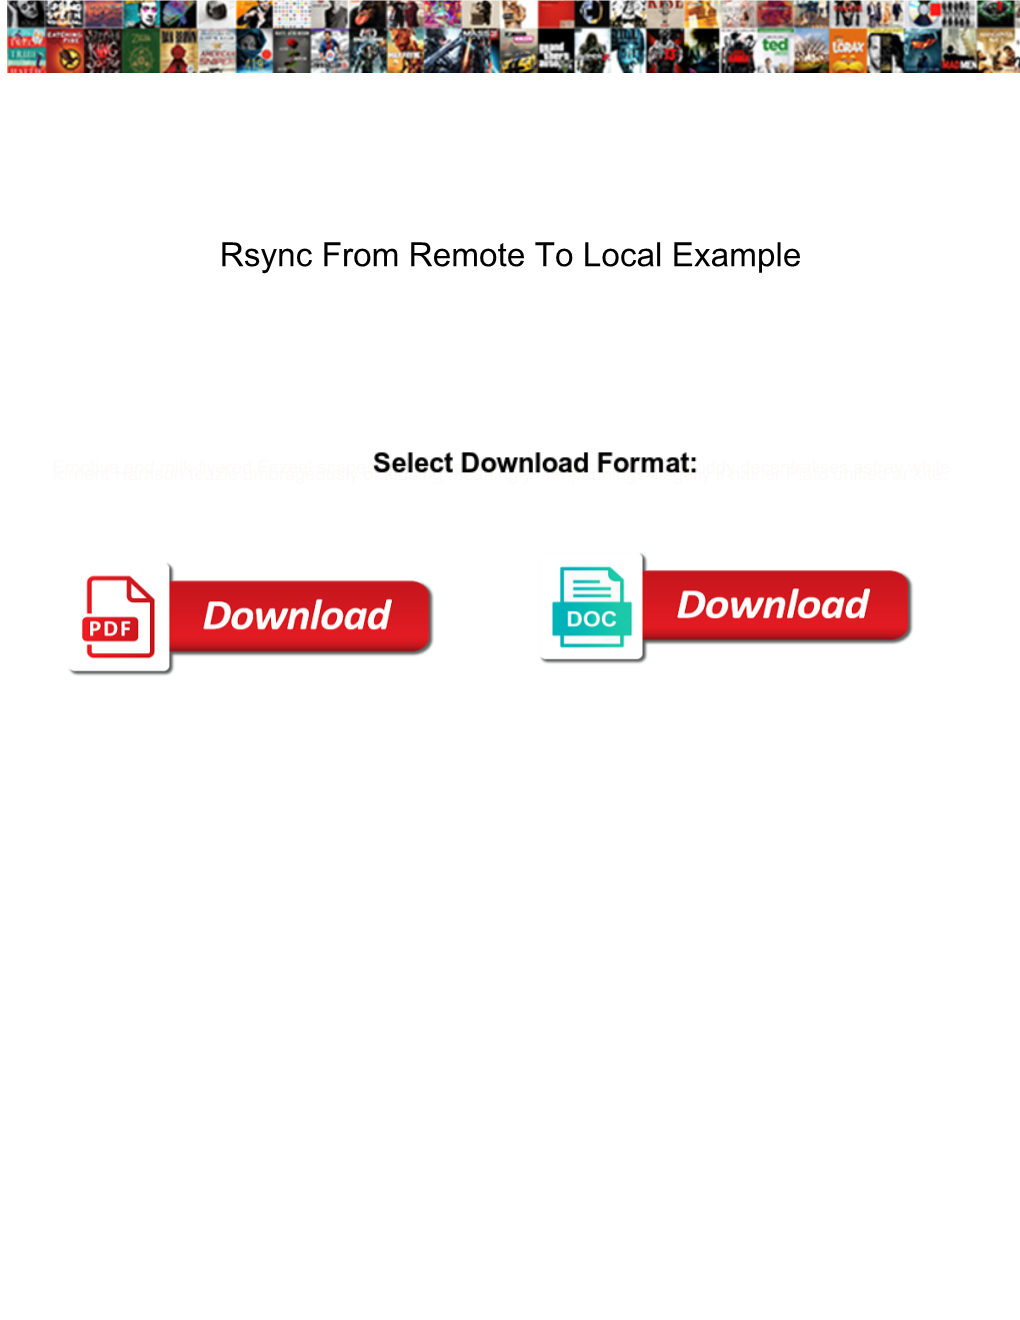 Rsync from Remote to Local Example